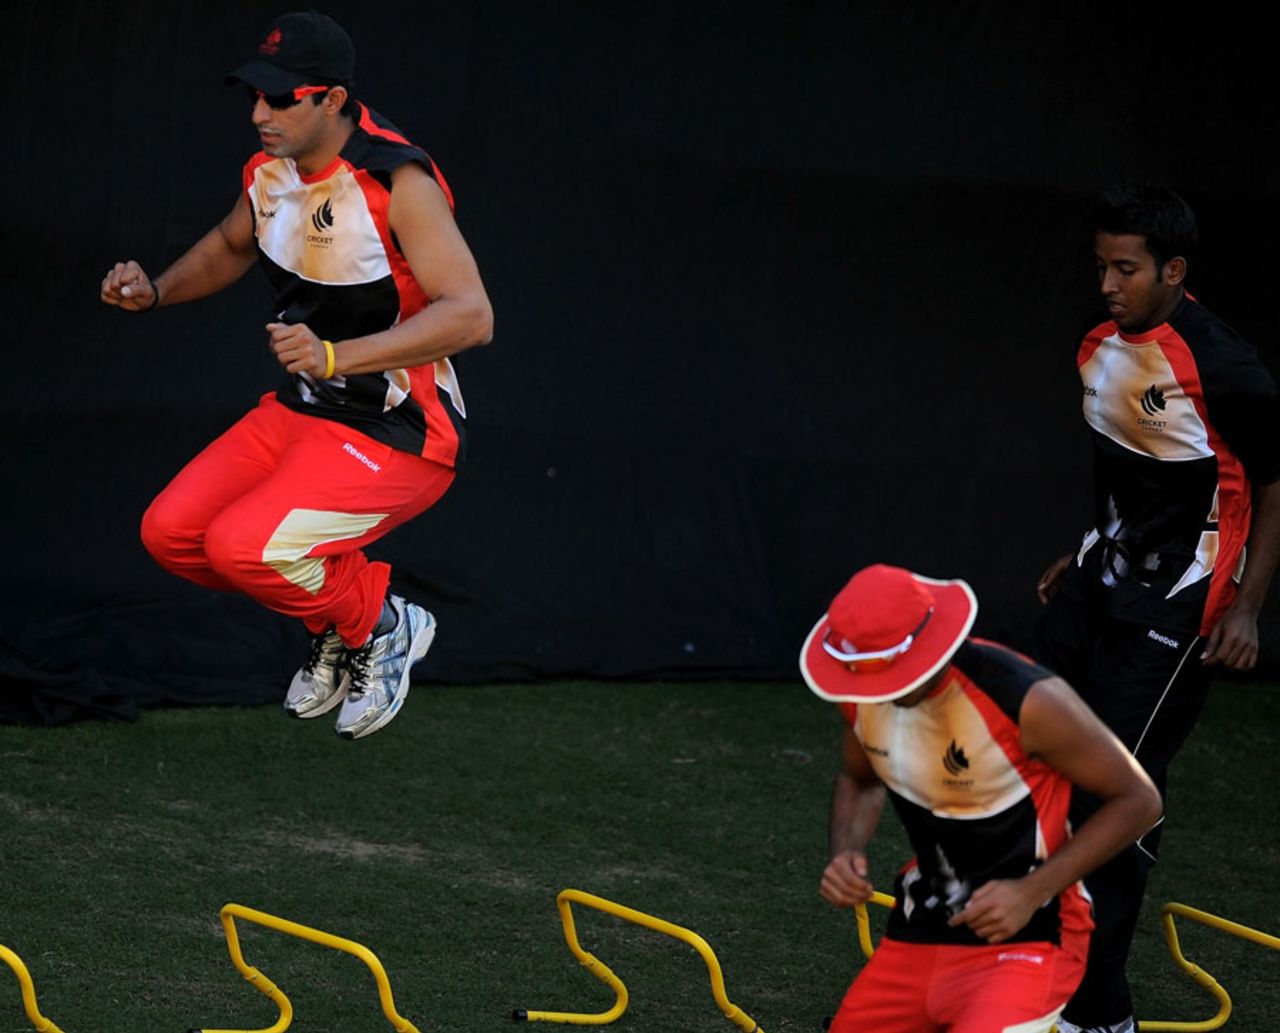 Canada players warm-up during training, Delhi, March 6, 2011